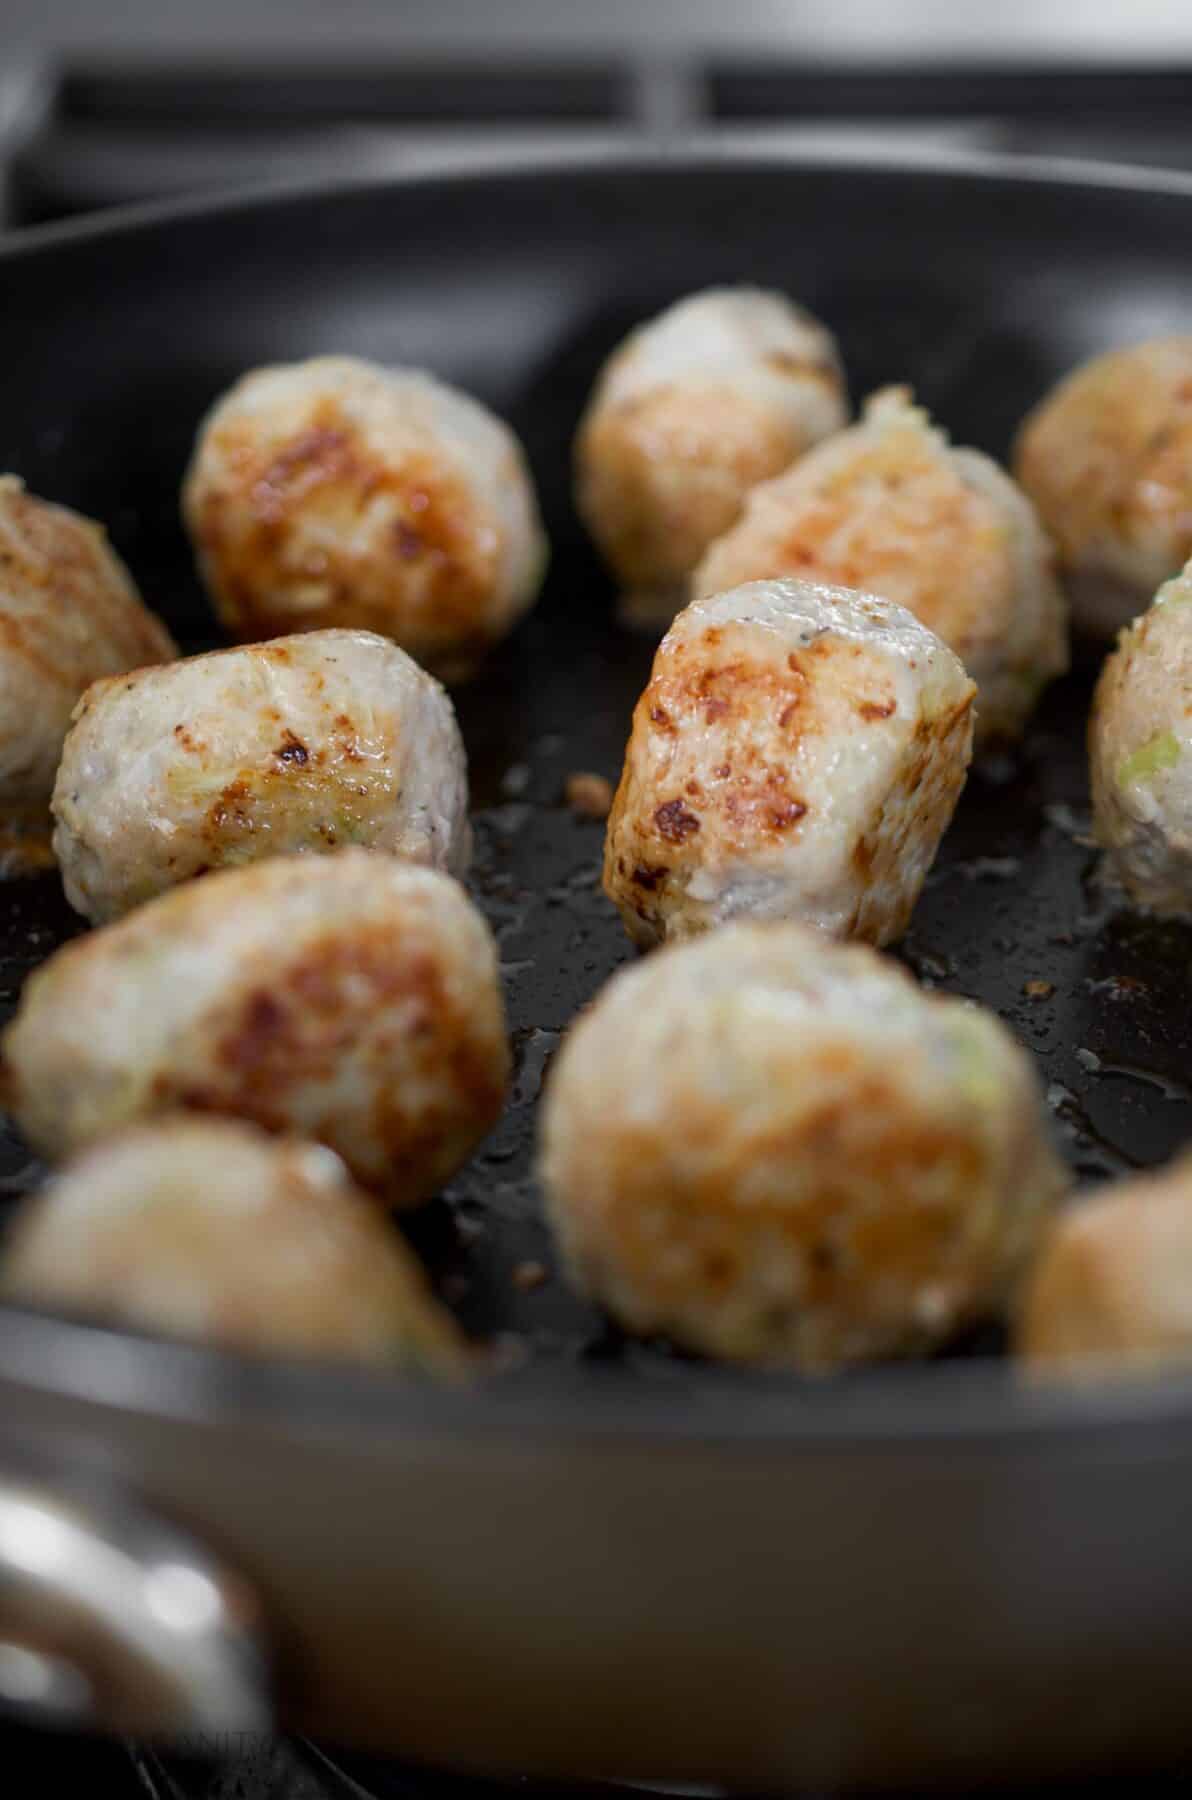 Chicken meatballs being browned in a skillet.